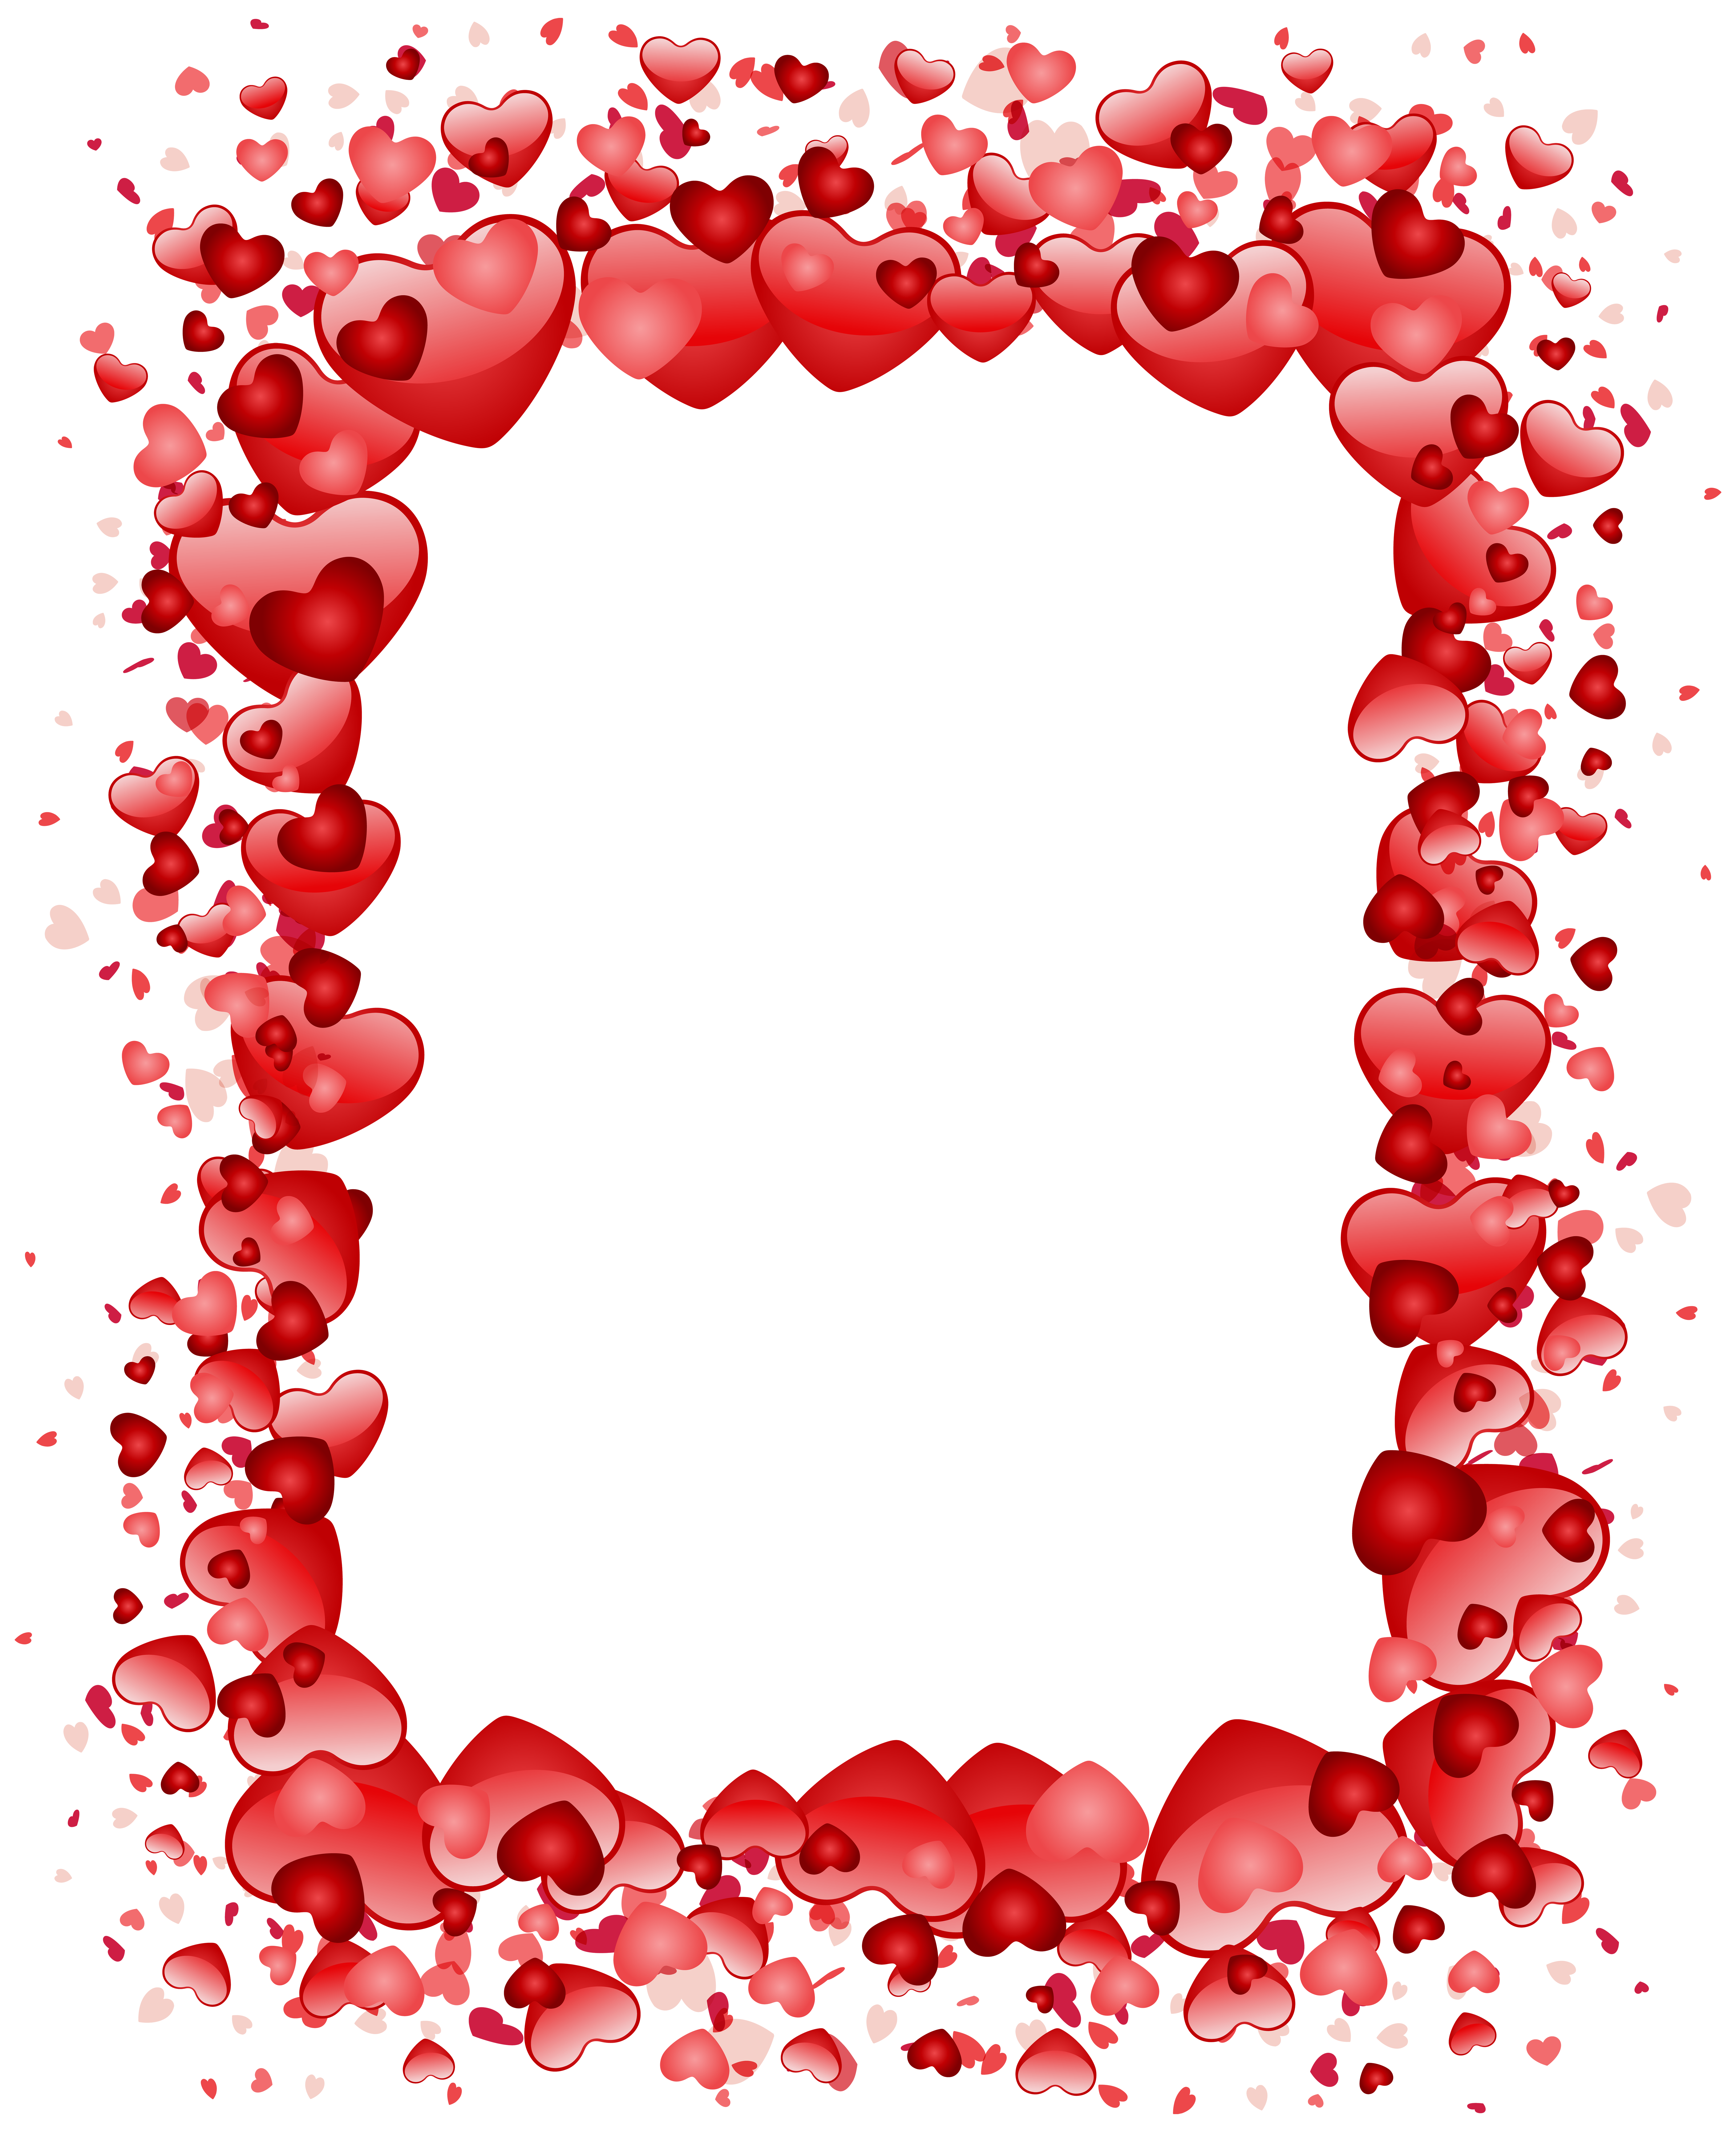 Search Results for “Valentines Day Clip Art Borders Black And White